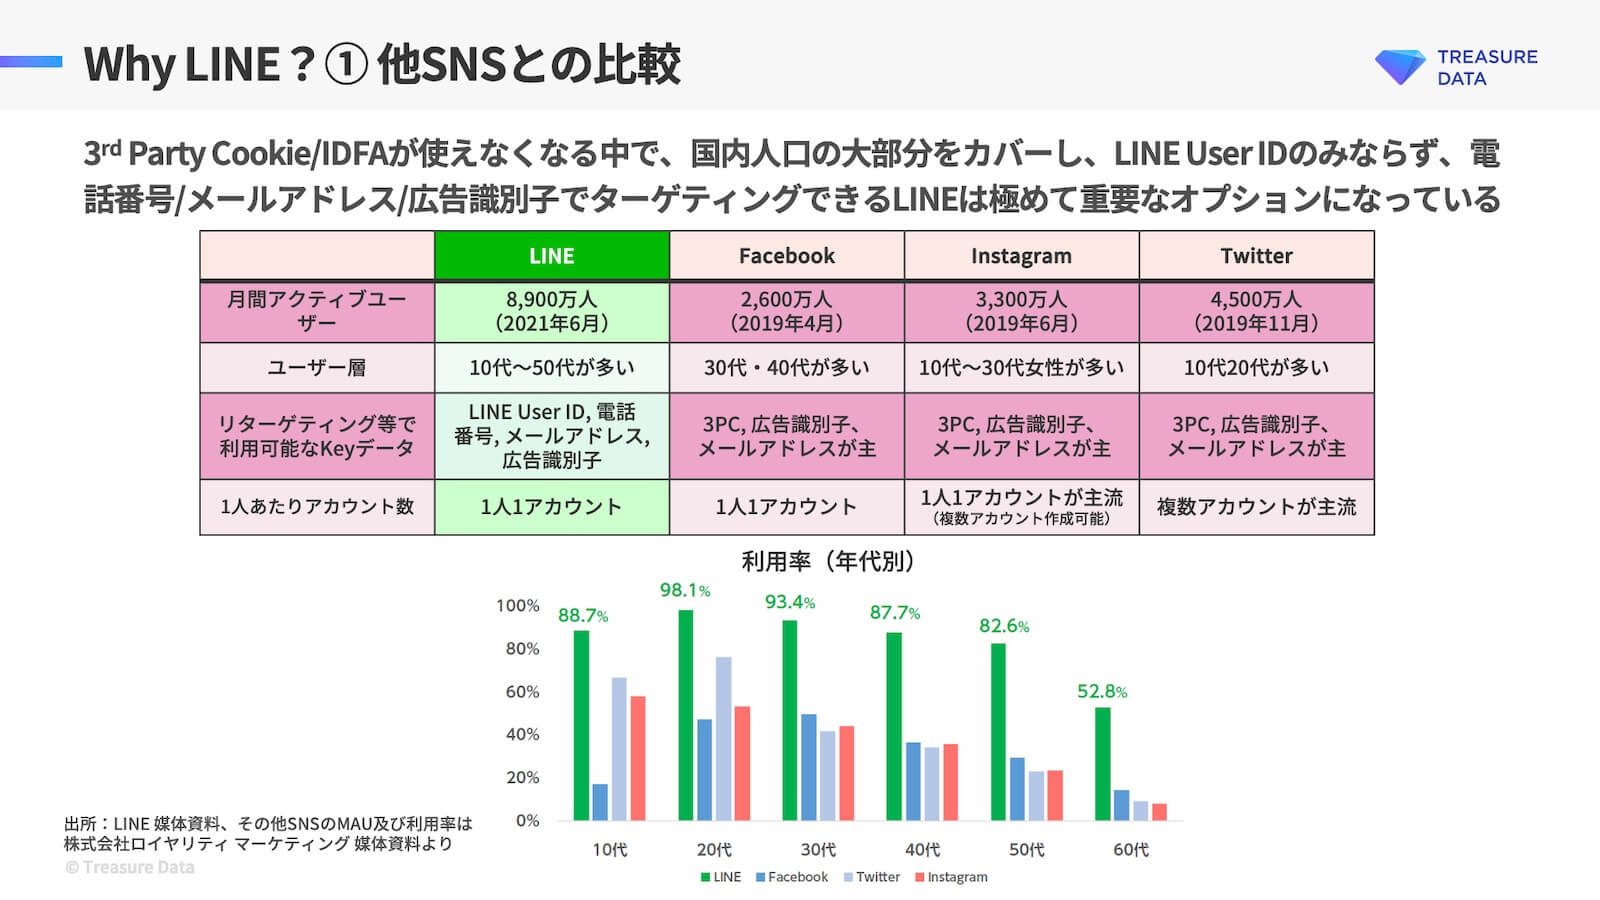 Why LINE?_他SNSとの比較